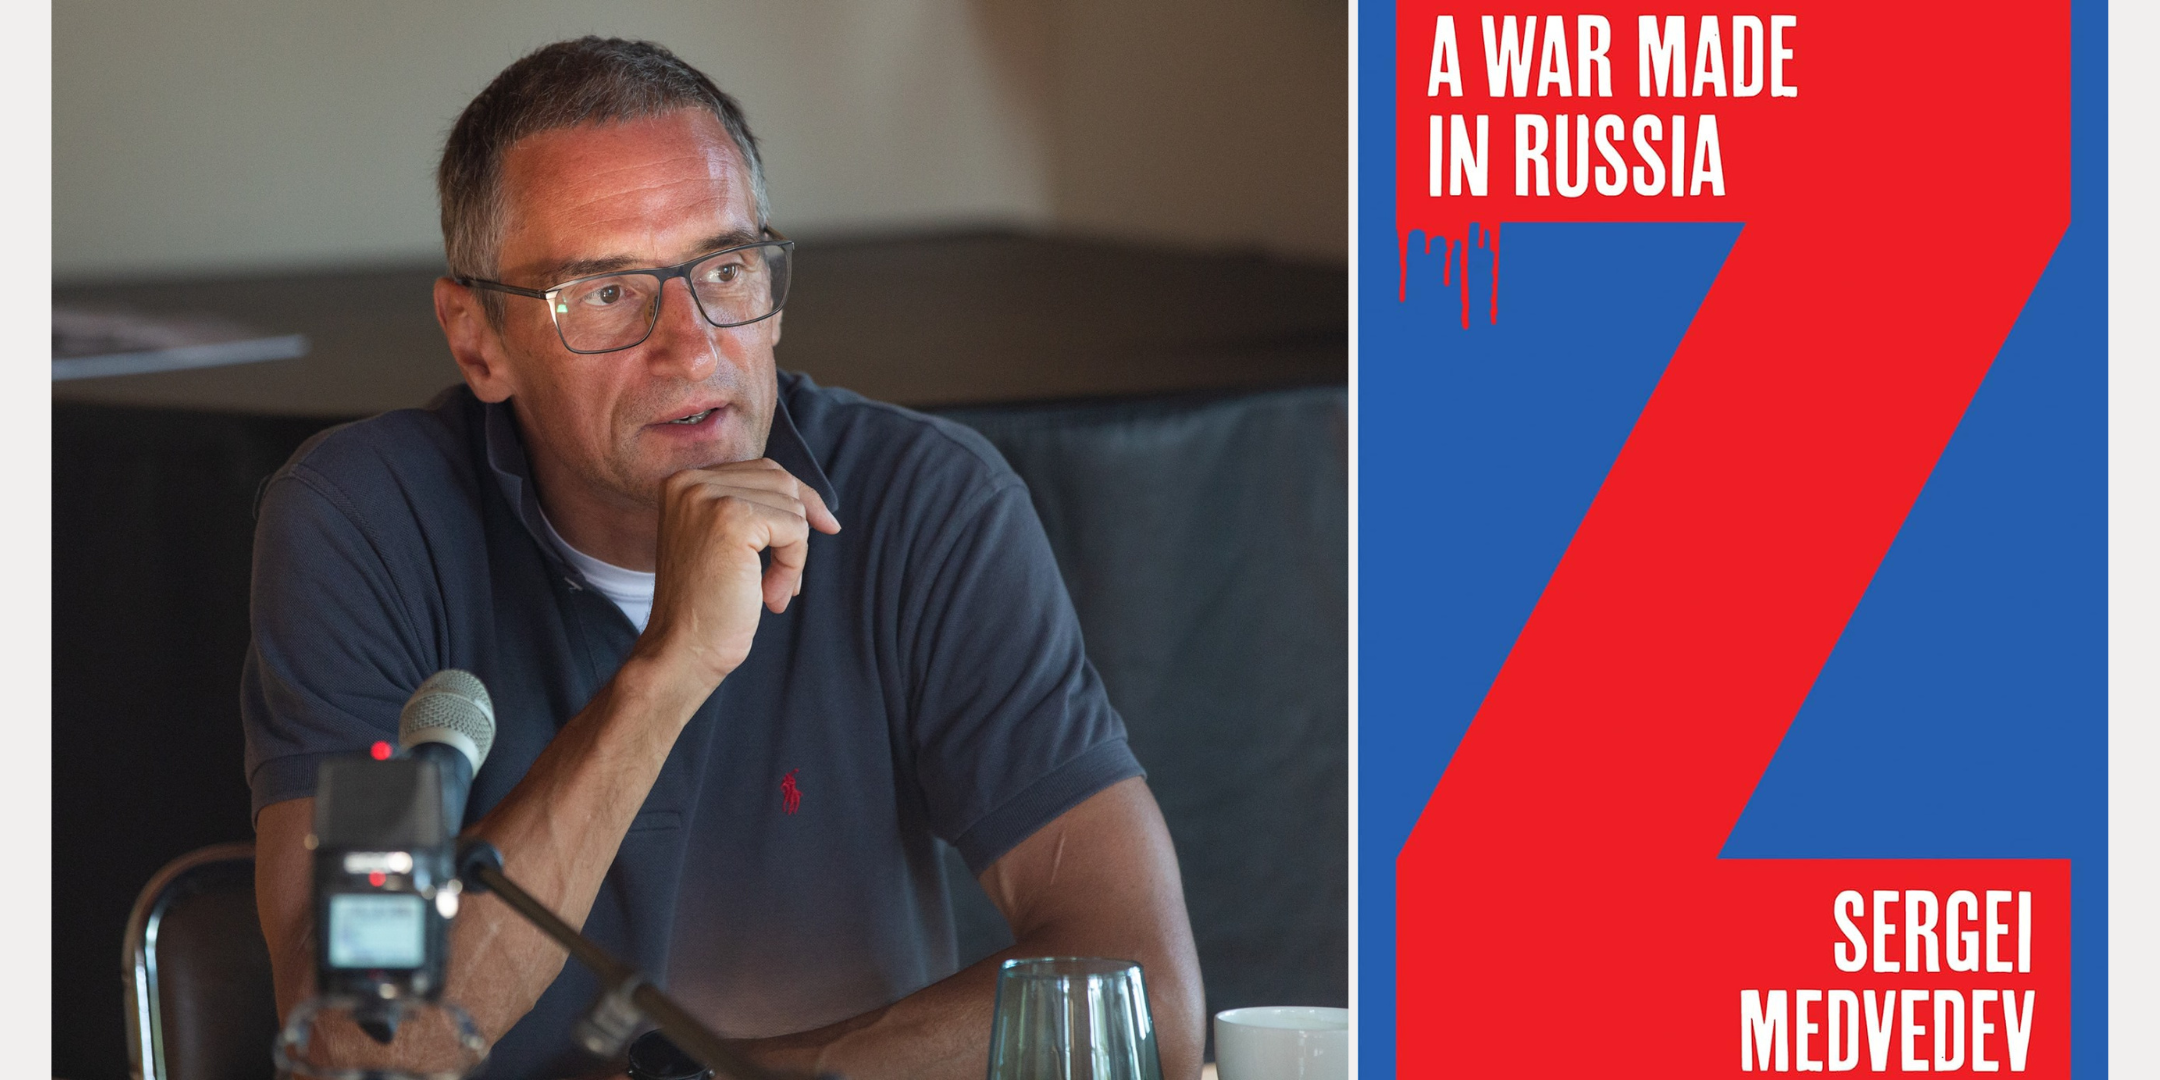 Meetings without translation: “A war made in Russia” by Sergei Medvedev - 
		14/05, 19:00